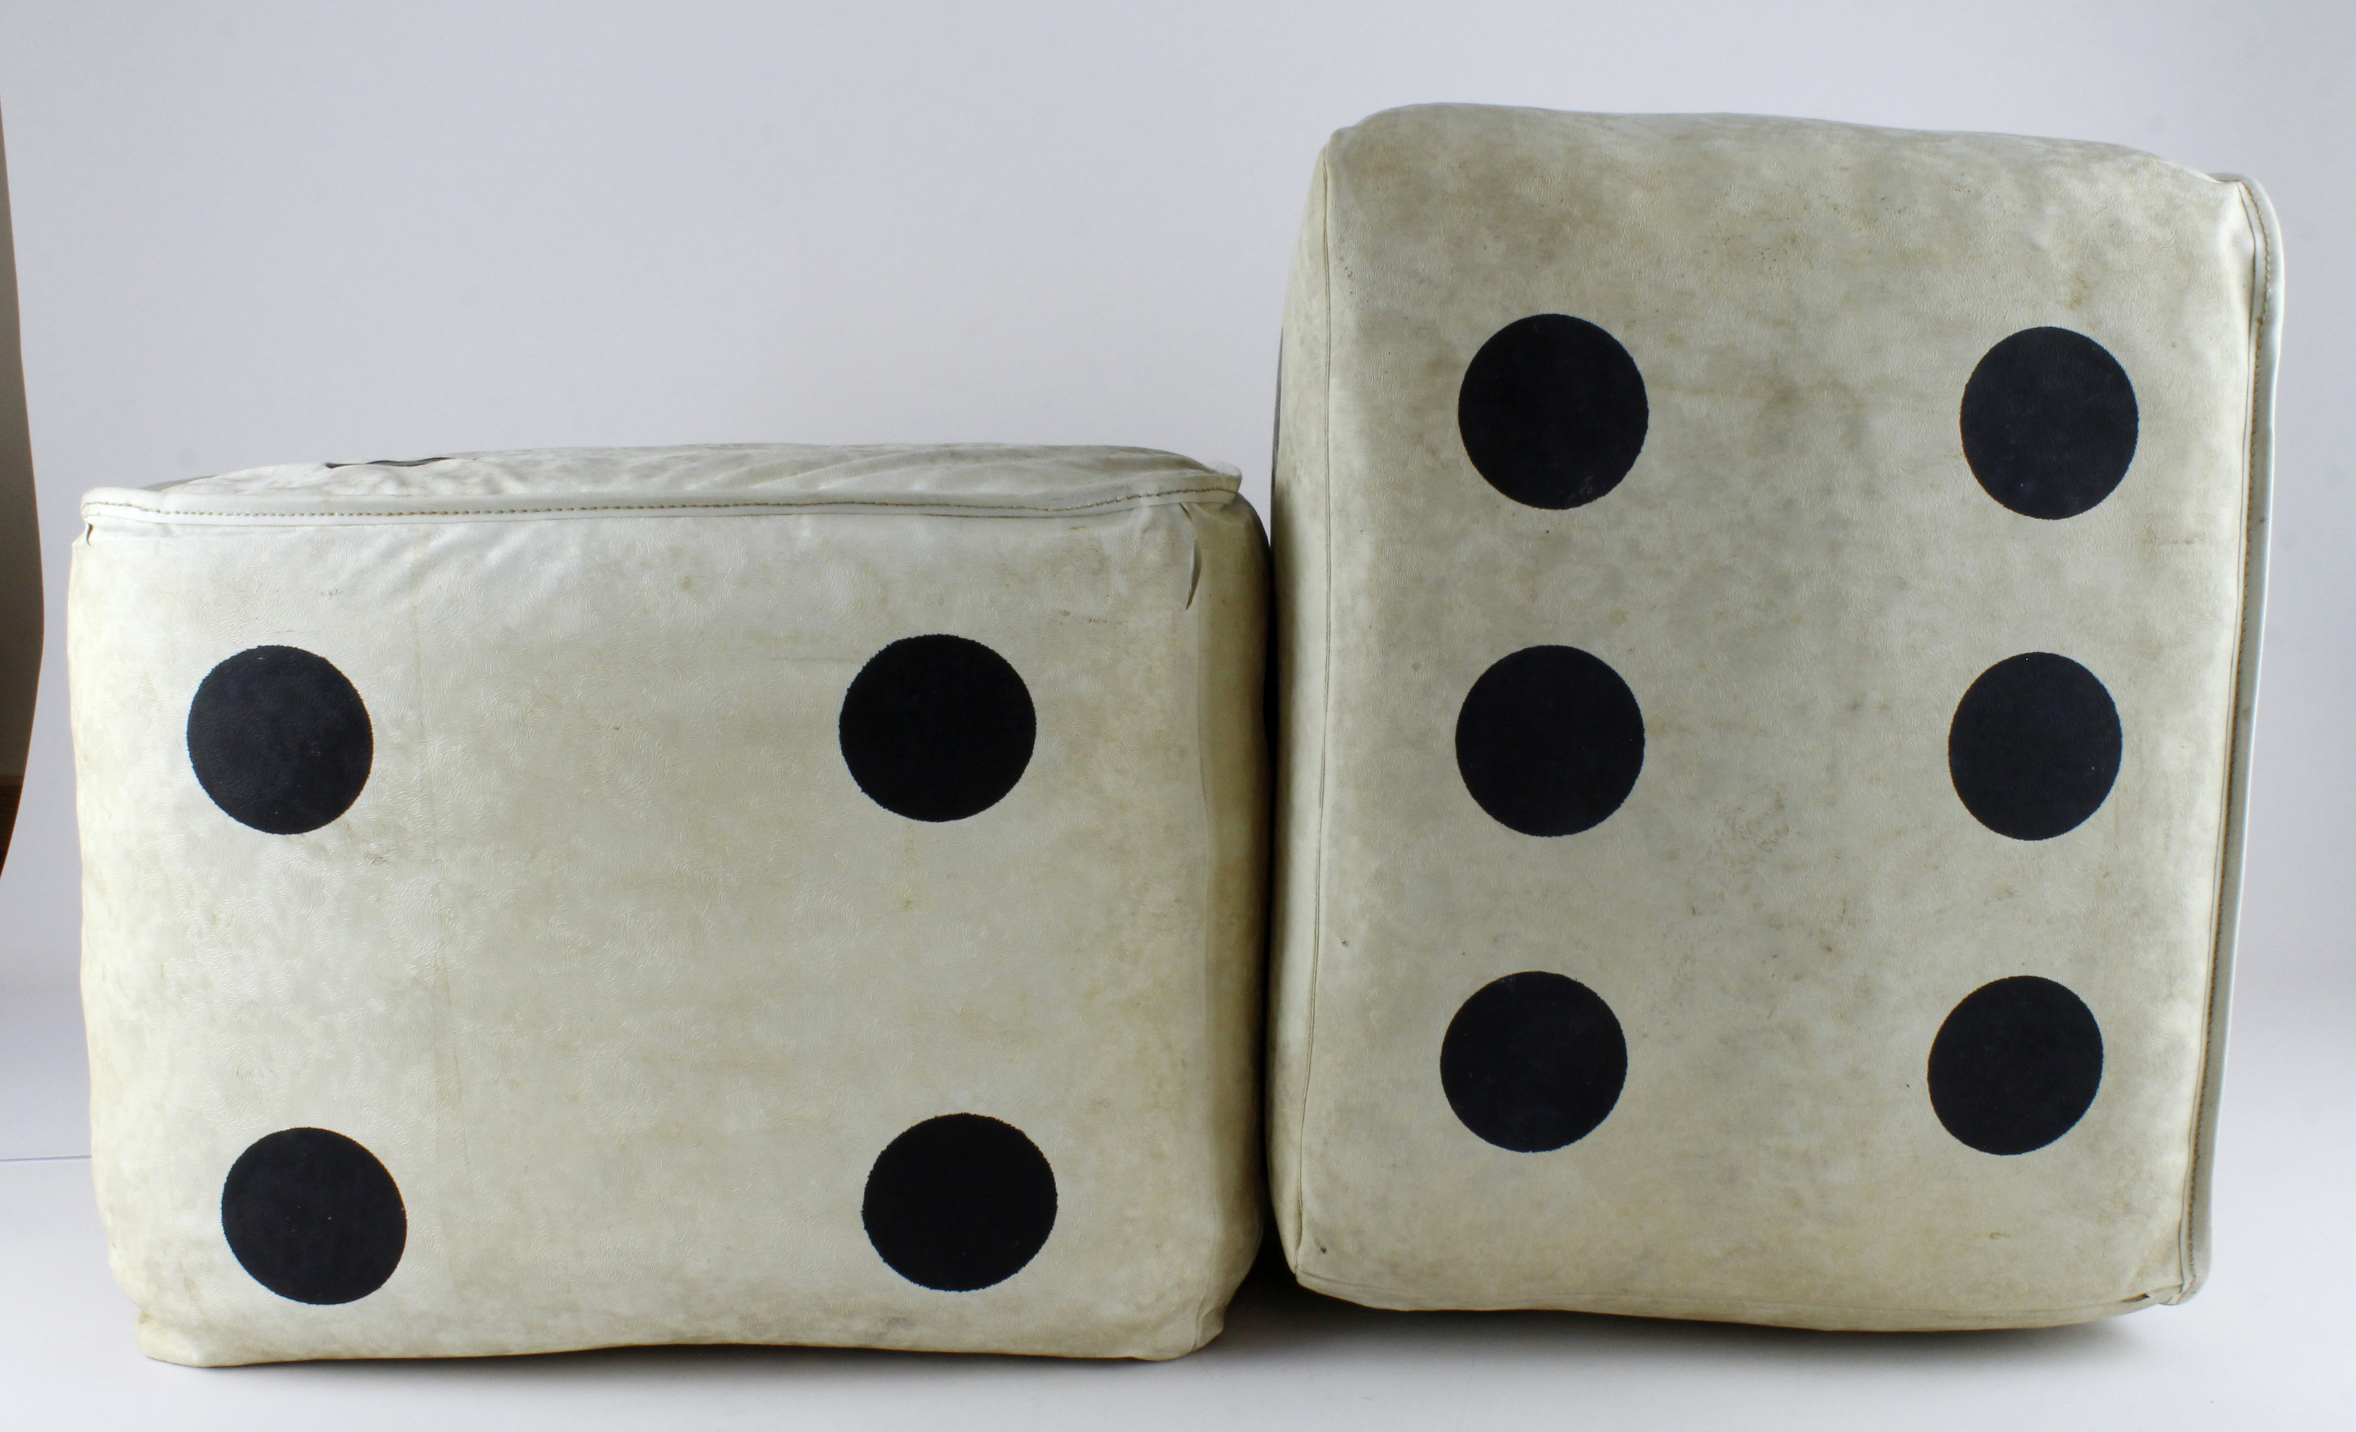 Two retro novelty foot stools / pouffe by Sherborne, depicting dice, height 27cm, diameter 47cm